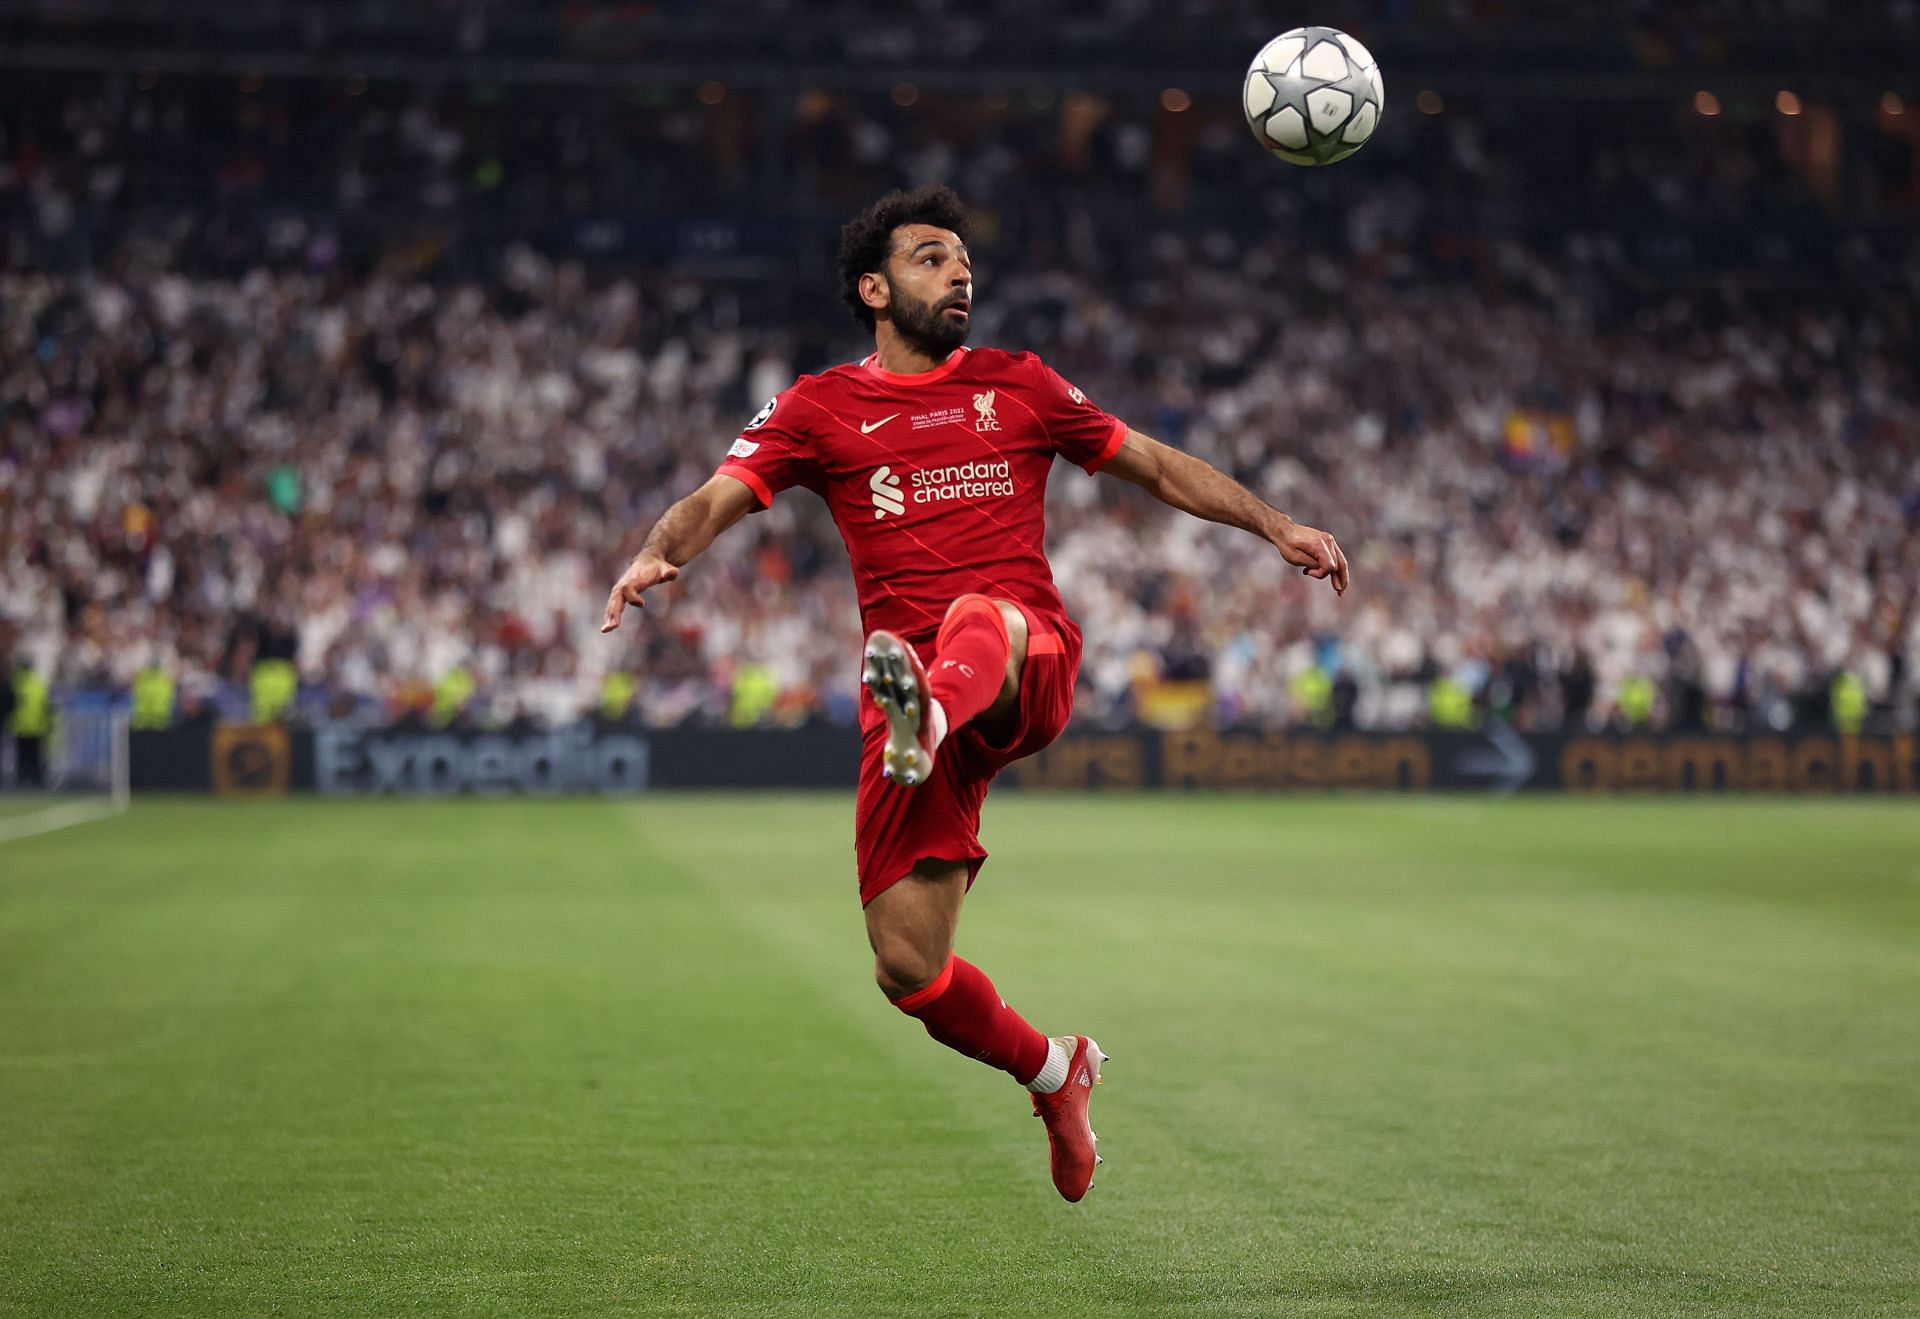 Salah is one of the most talented footballers of his generation